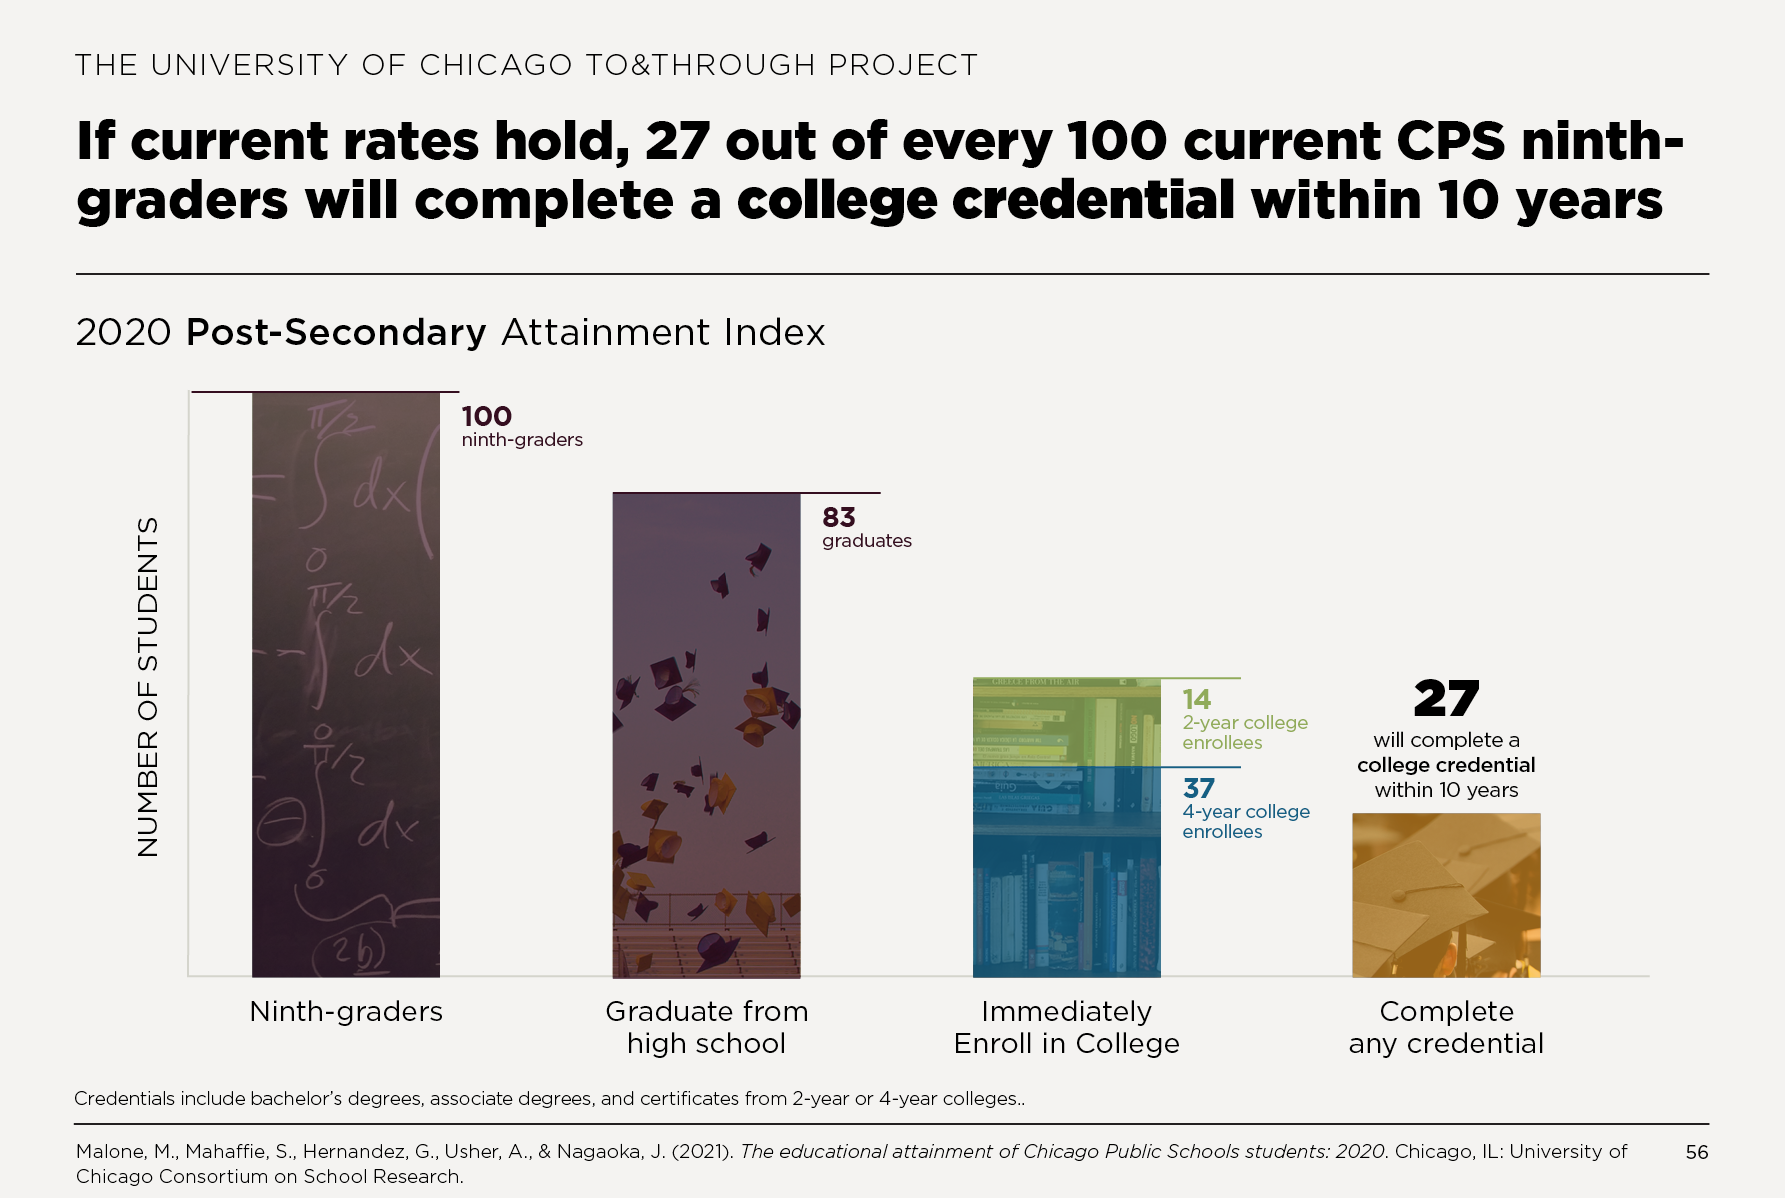 If current rates hold, 27 out of every 100 current CPS ninth-graders will complete a college credential within 10 years